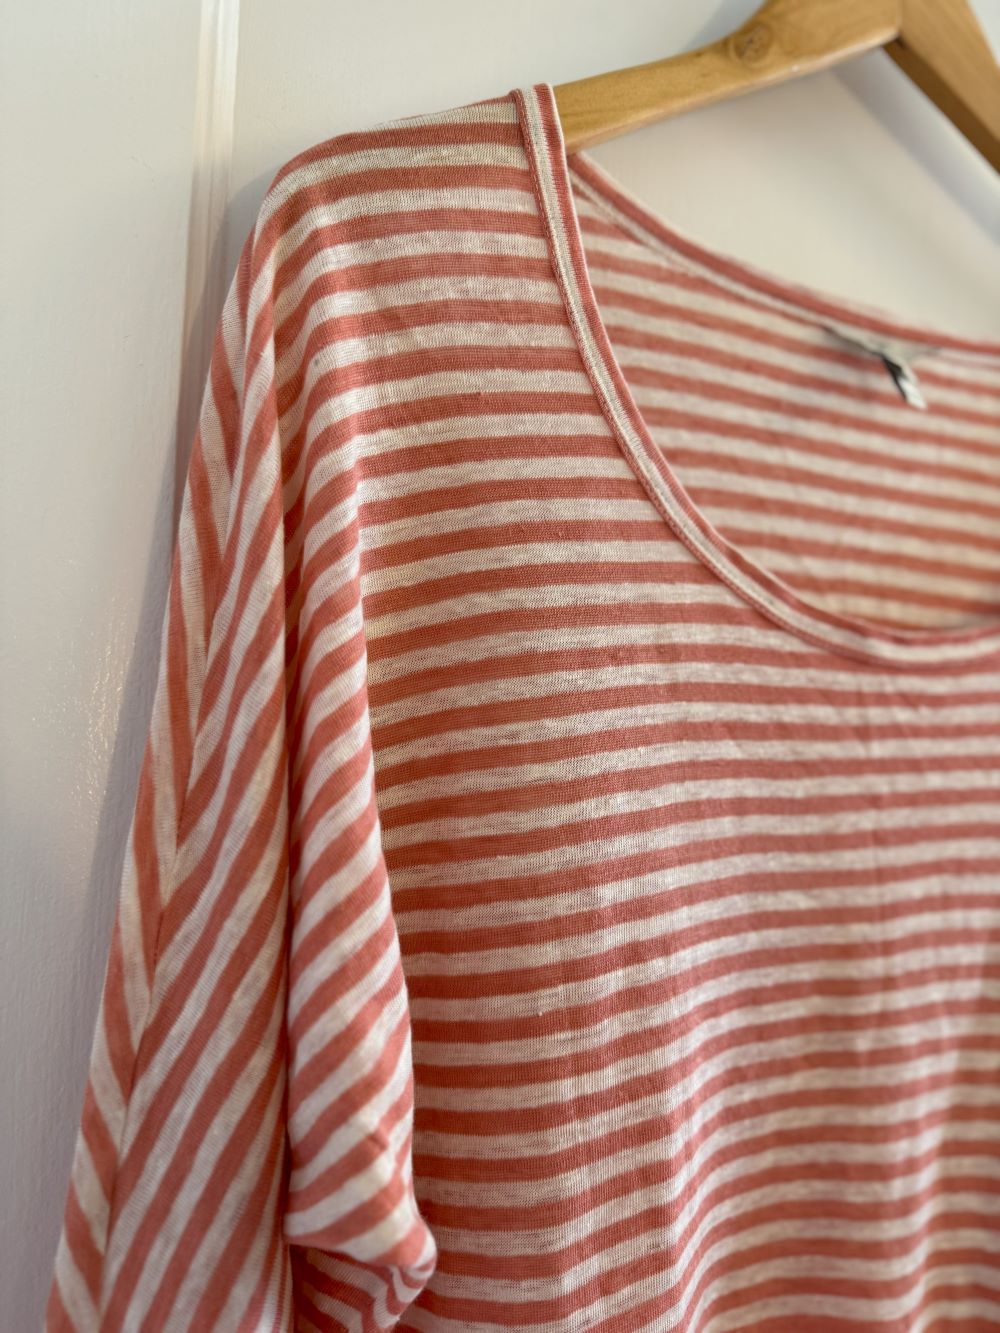 Joie Pink/White Striped Shirt, Women's Small